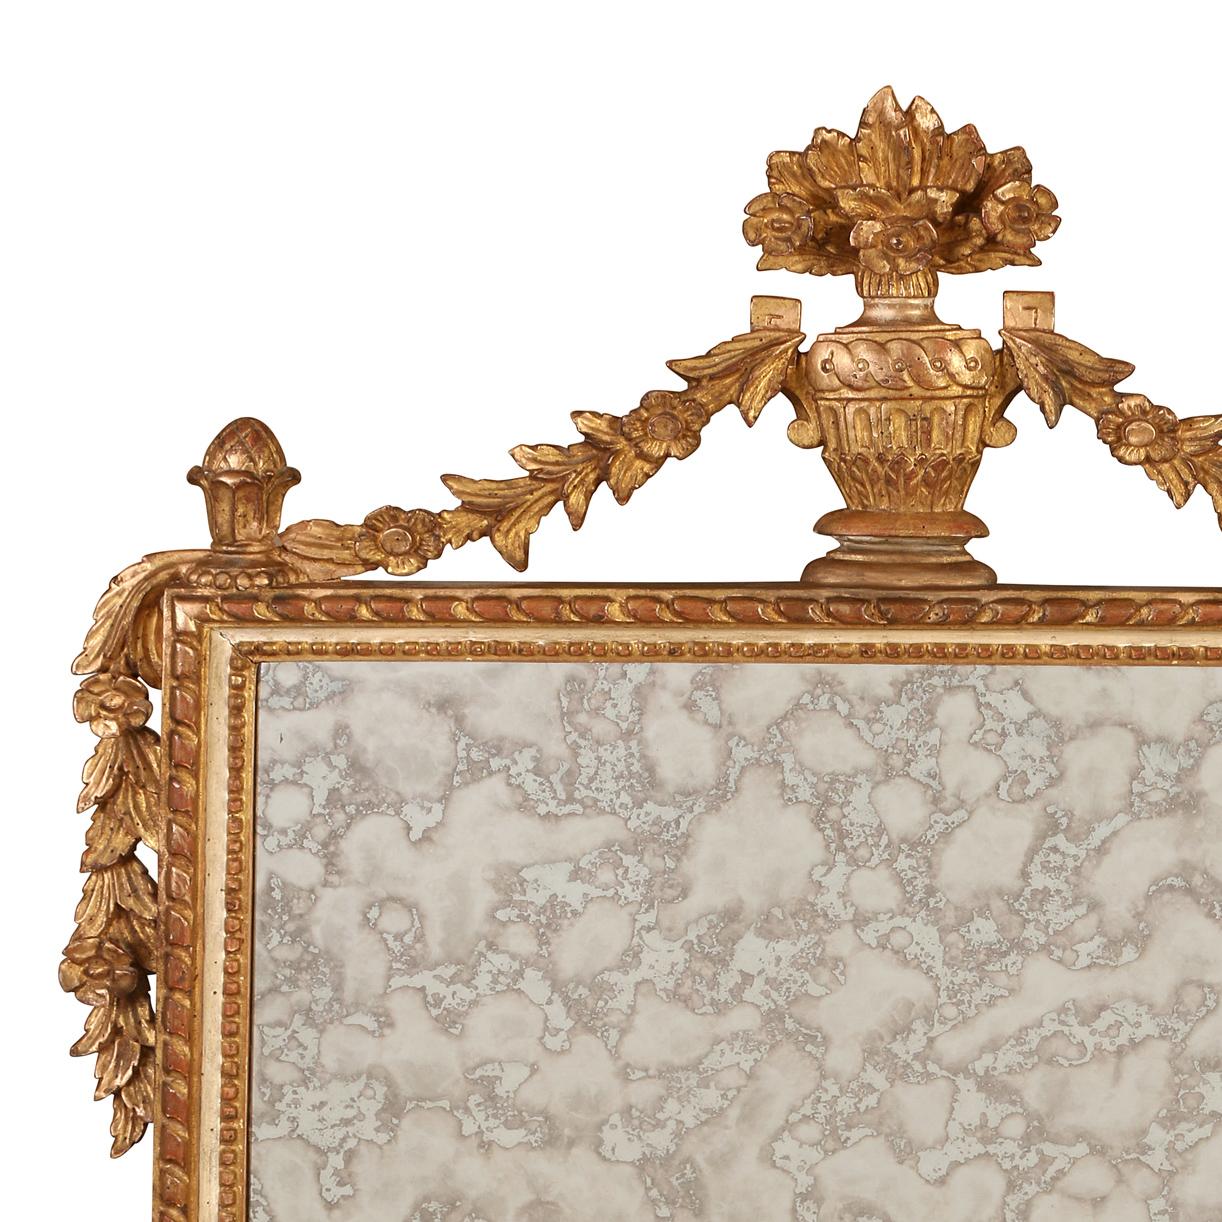 20th Century Neoclassical Giltwood Mirror With Urn and Garland Crest For Sale